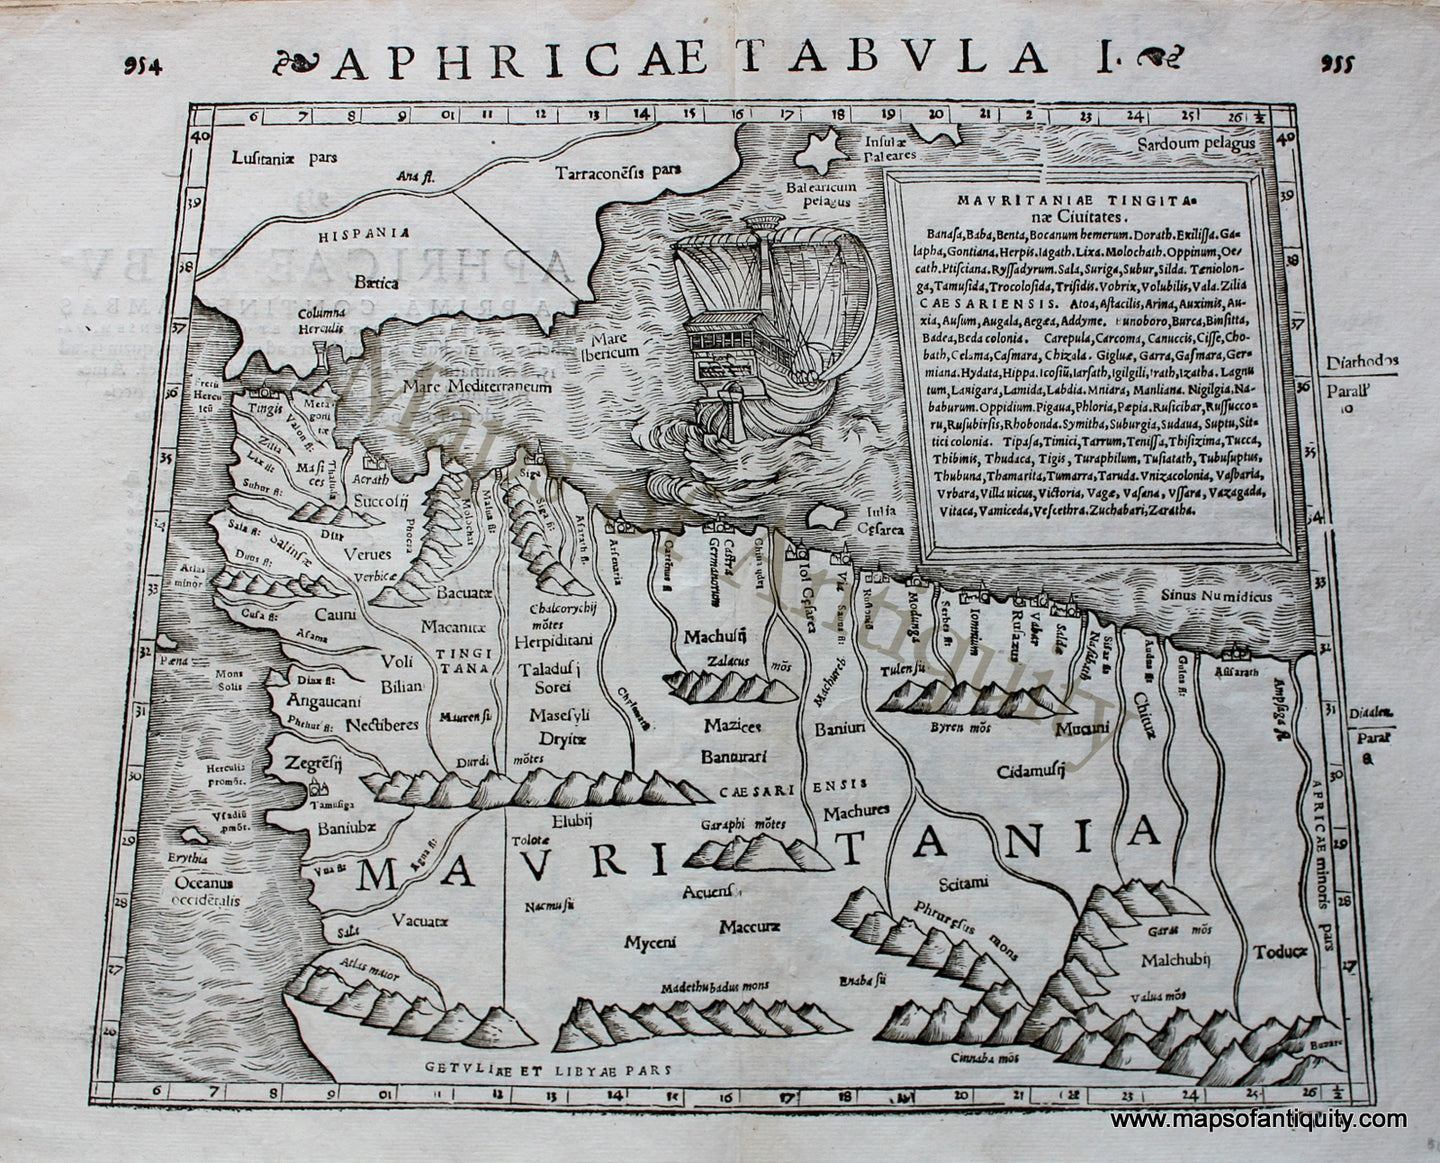 Antique-Black-and-White-Engraved-Map-Aphricae-Tabula-I---954-955-North-Africa--1542-Munster-Maps-Of-Antiquity